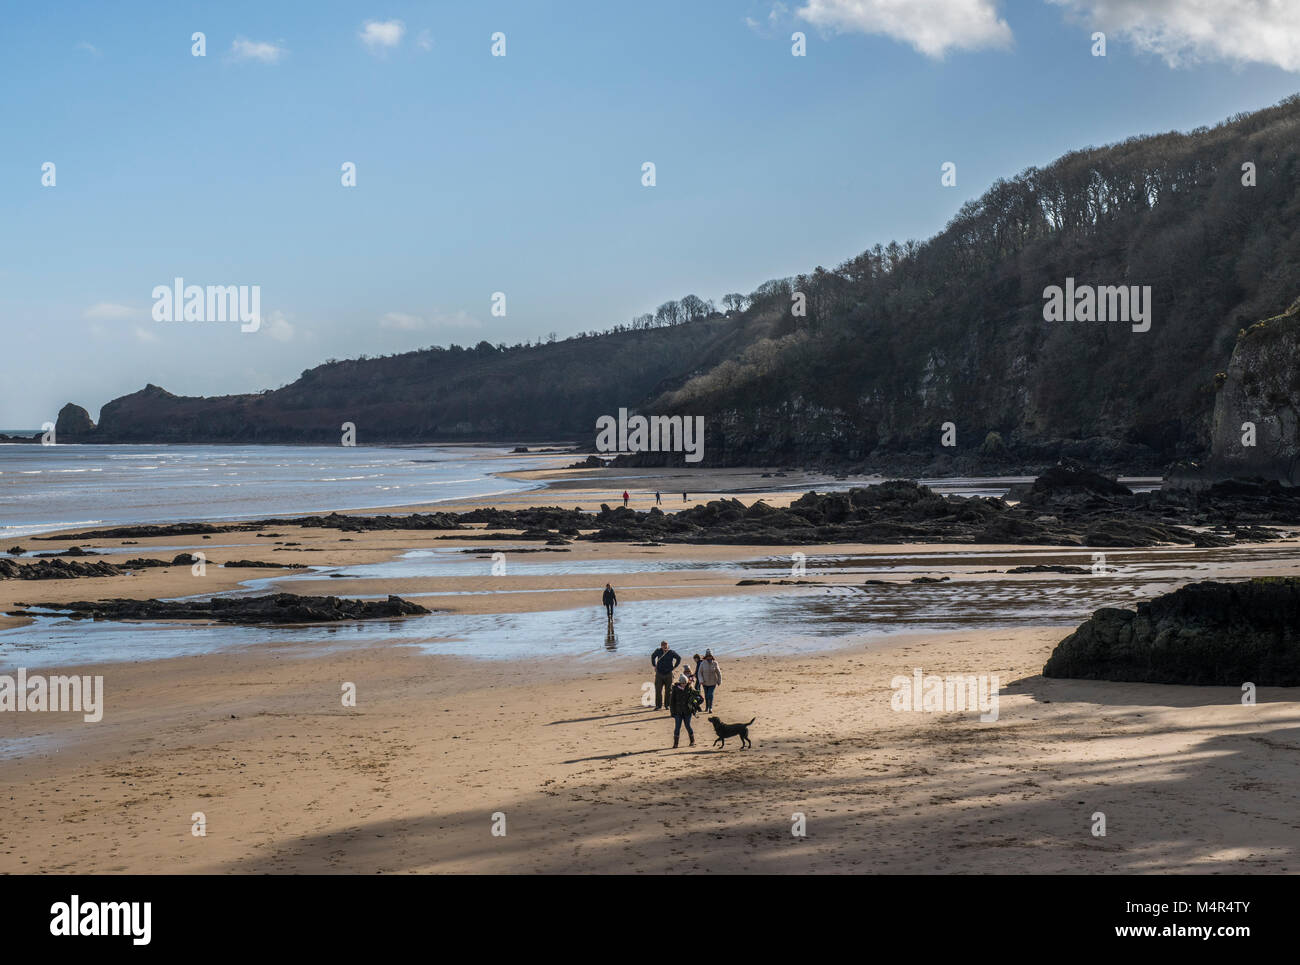 Saundersfoot Beach on the Pembrokeshire Coast, West Wales, with people walking on the sands. Stock Photo